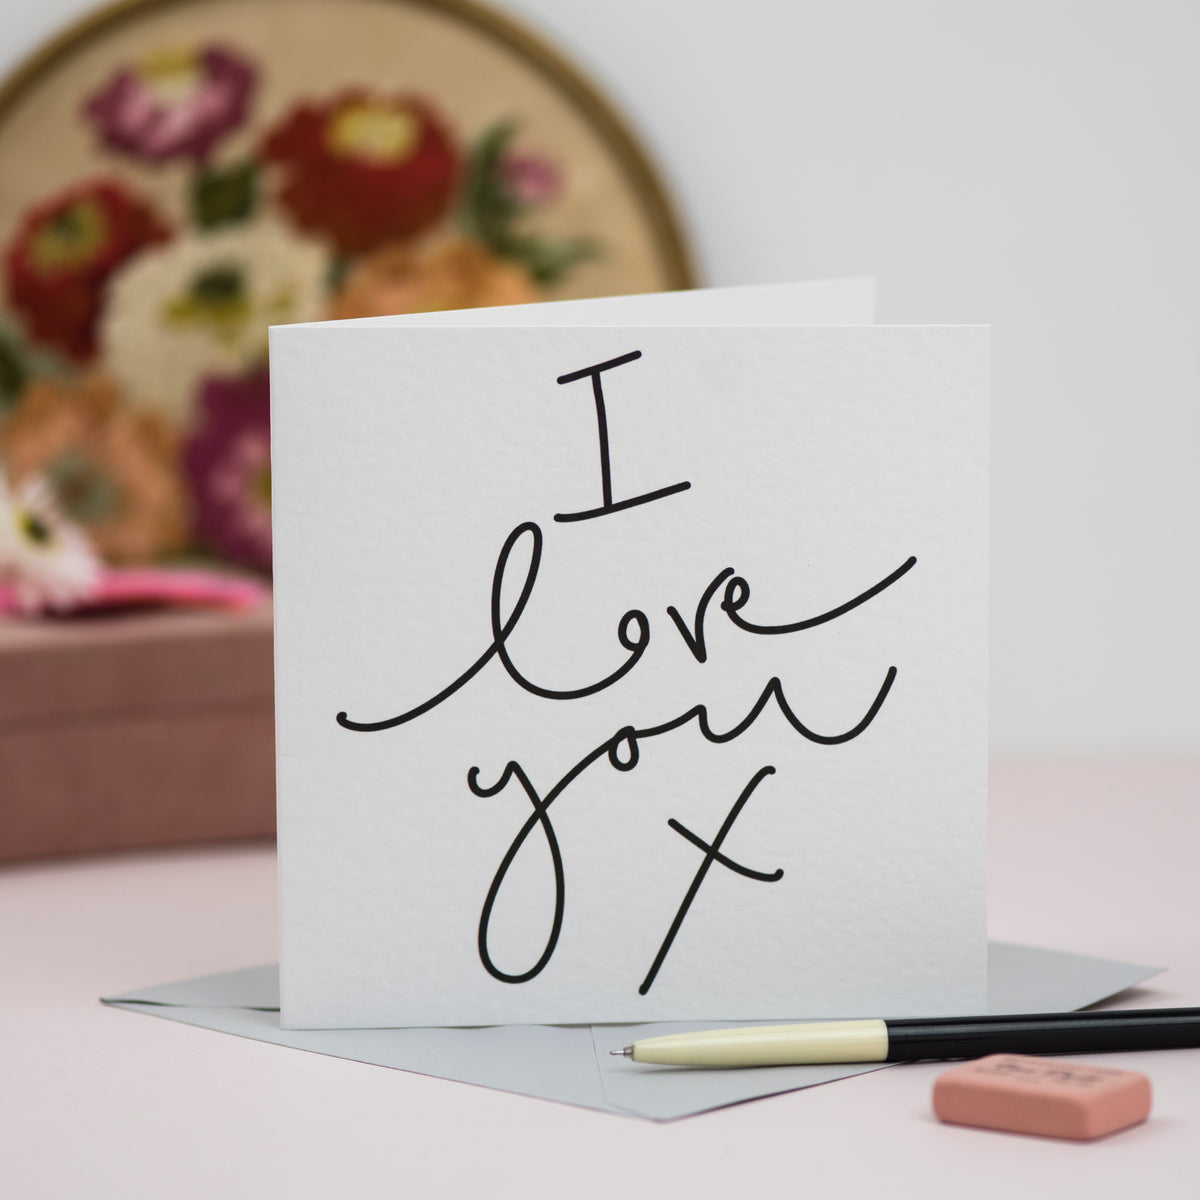 'I Love You X' Hand Lettered Card